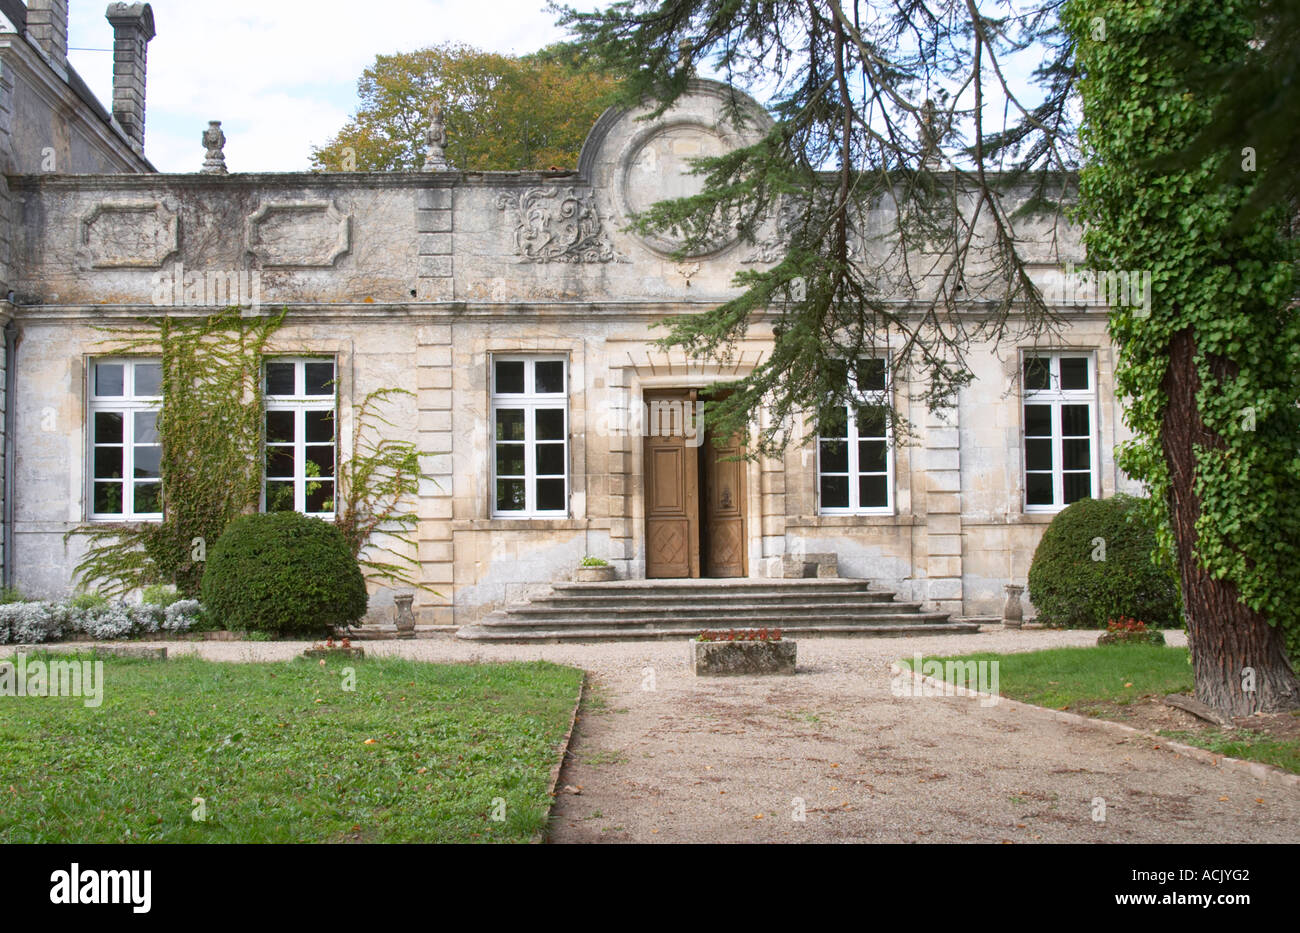 The front towards the gate and court yard of the chateau building with classic facade and stately steps leading up to the door. Stock Photo